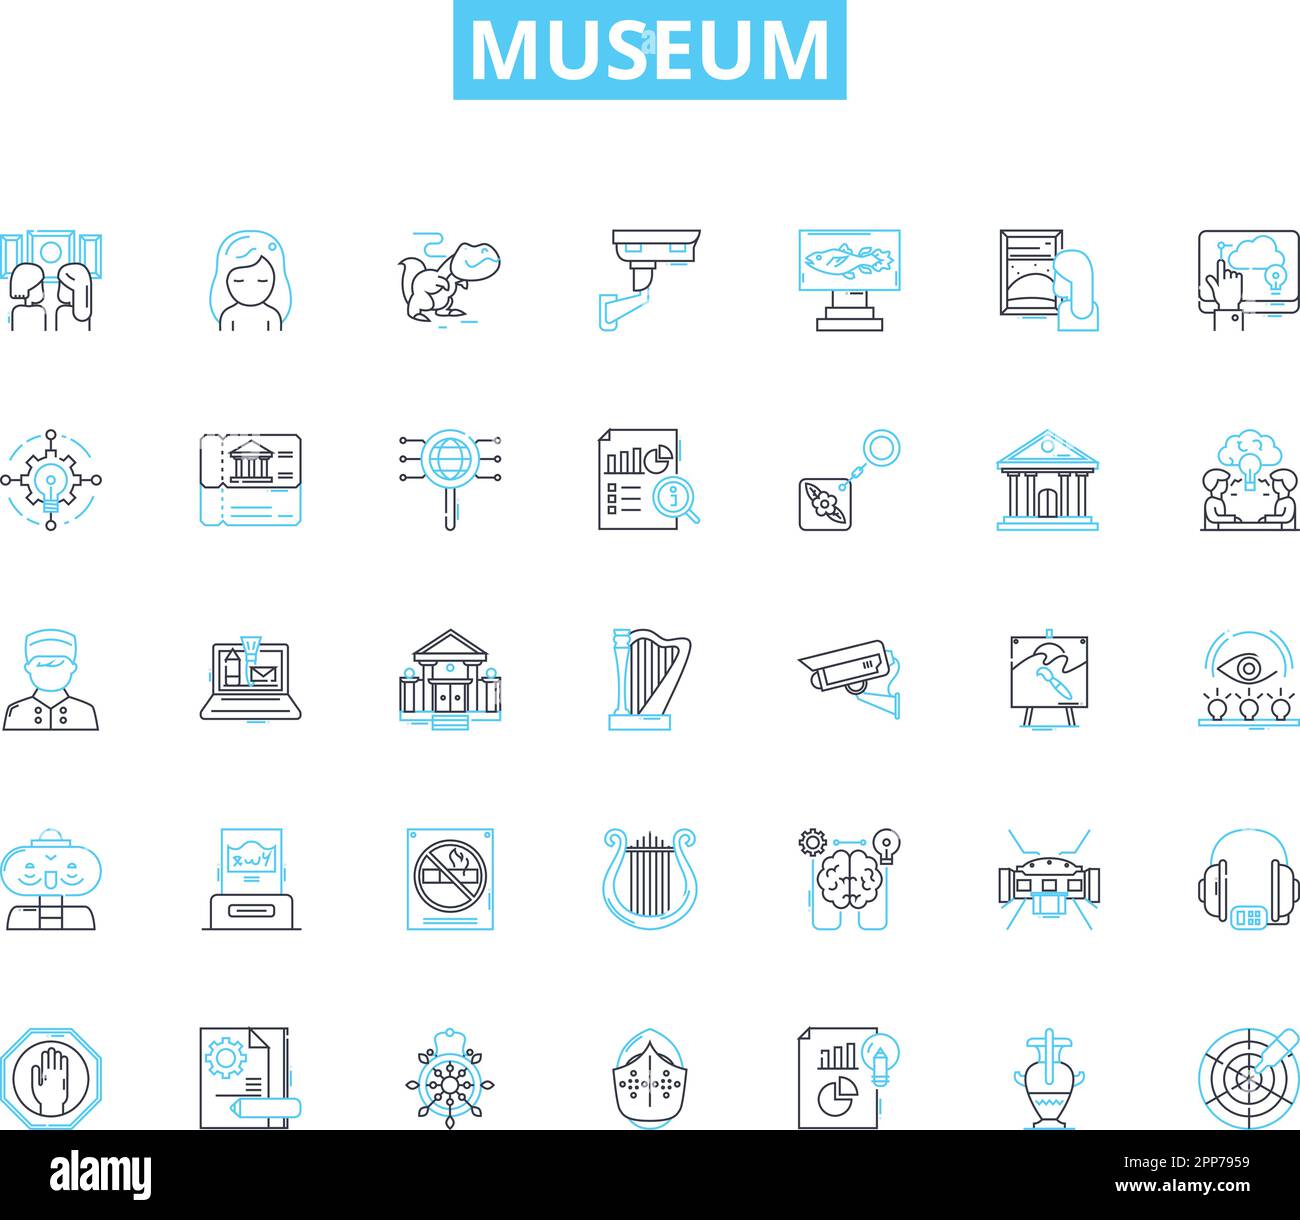 Museum linear icons set. Artifacts, Exhibits, Gallery, Archaeology, History, Memorabilia, Sculpture line vector and concept signs. Antiquities Stock Vector